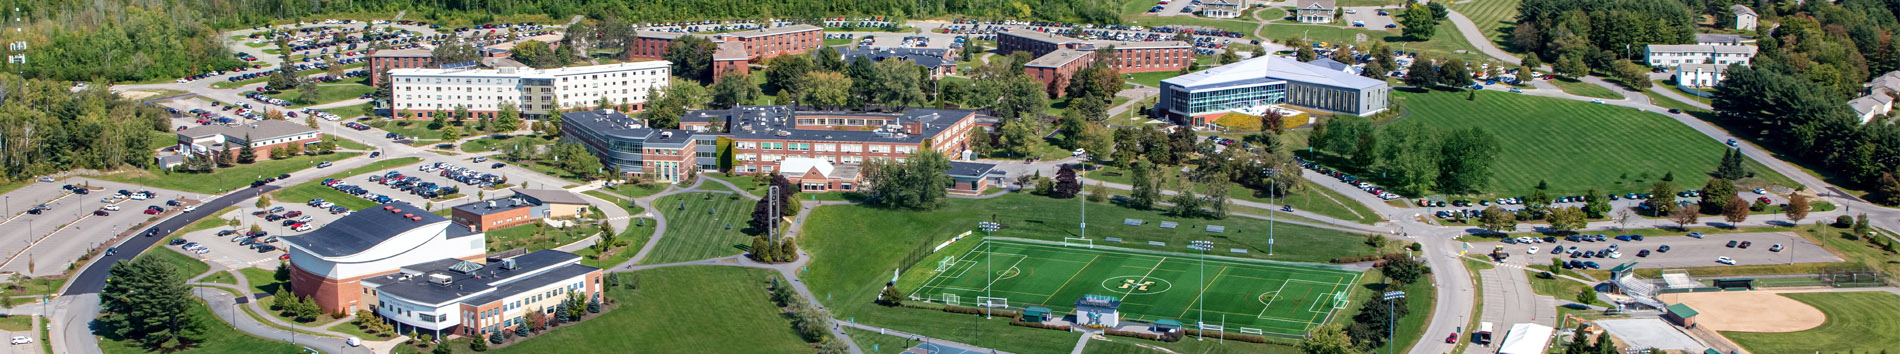 Aerial photo of the Husson University campus in Bangor, Maine